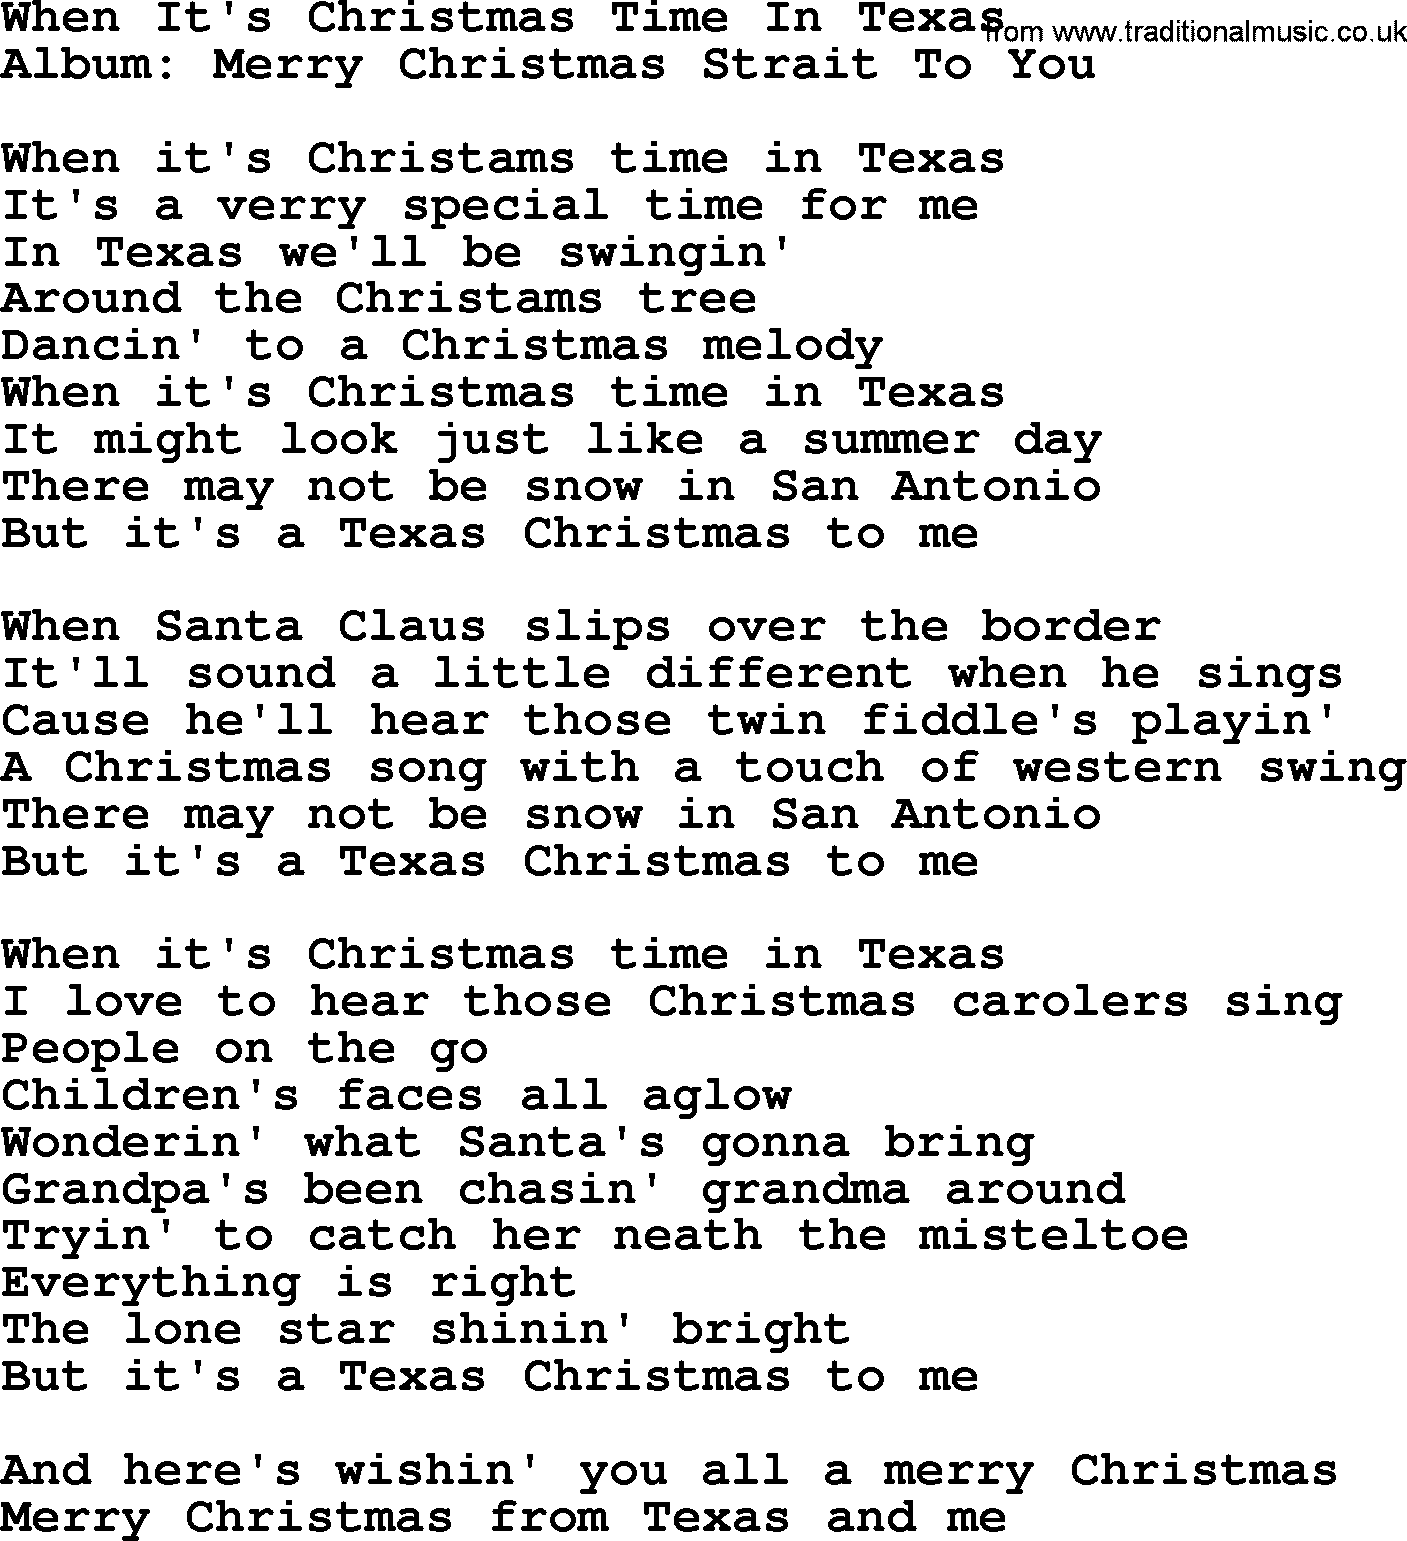 George Strait song: When It's Christmas Time In Texas, lyrics